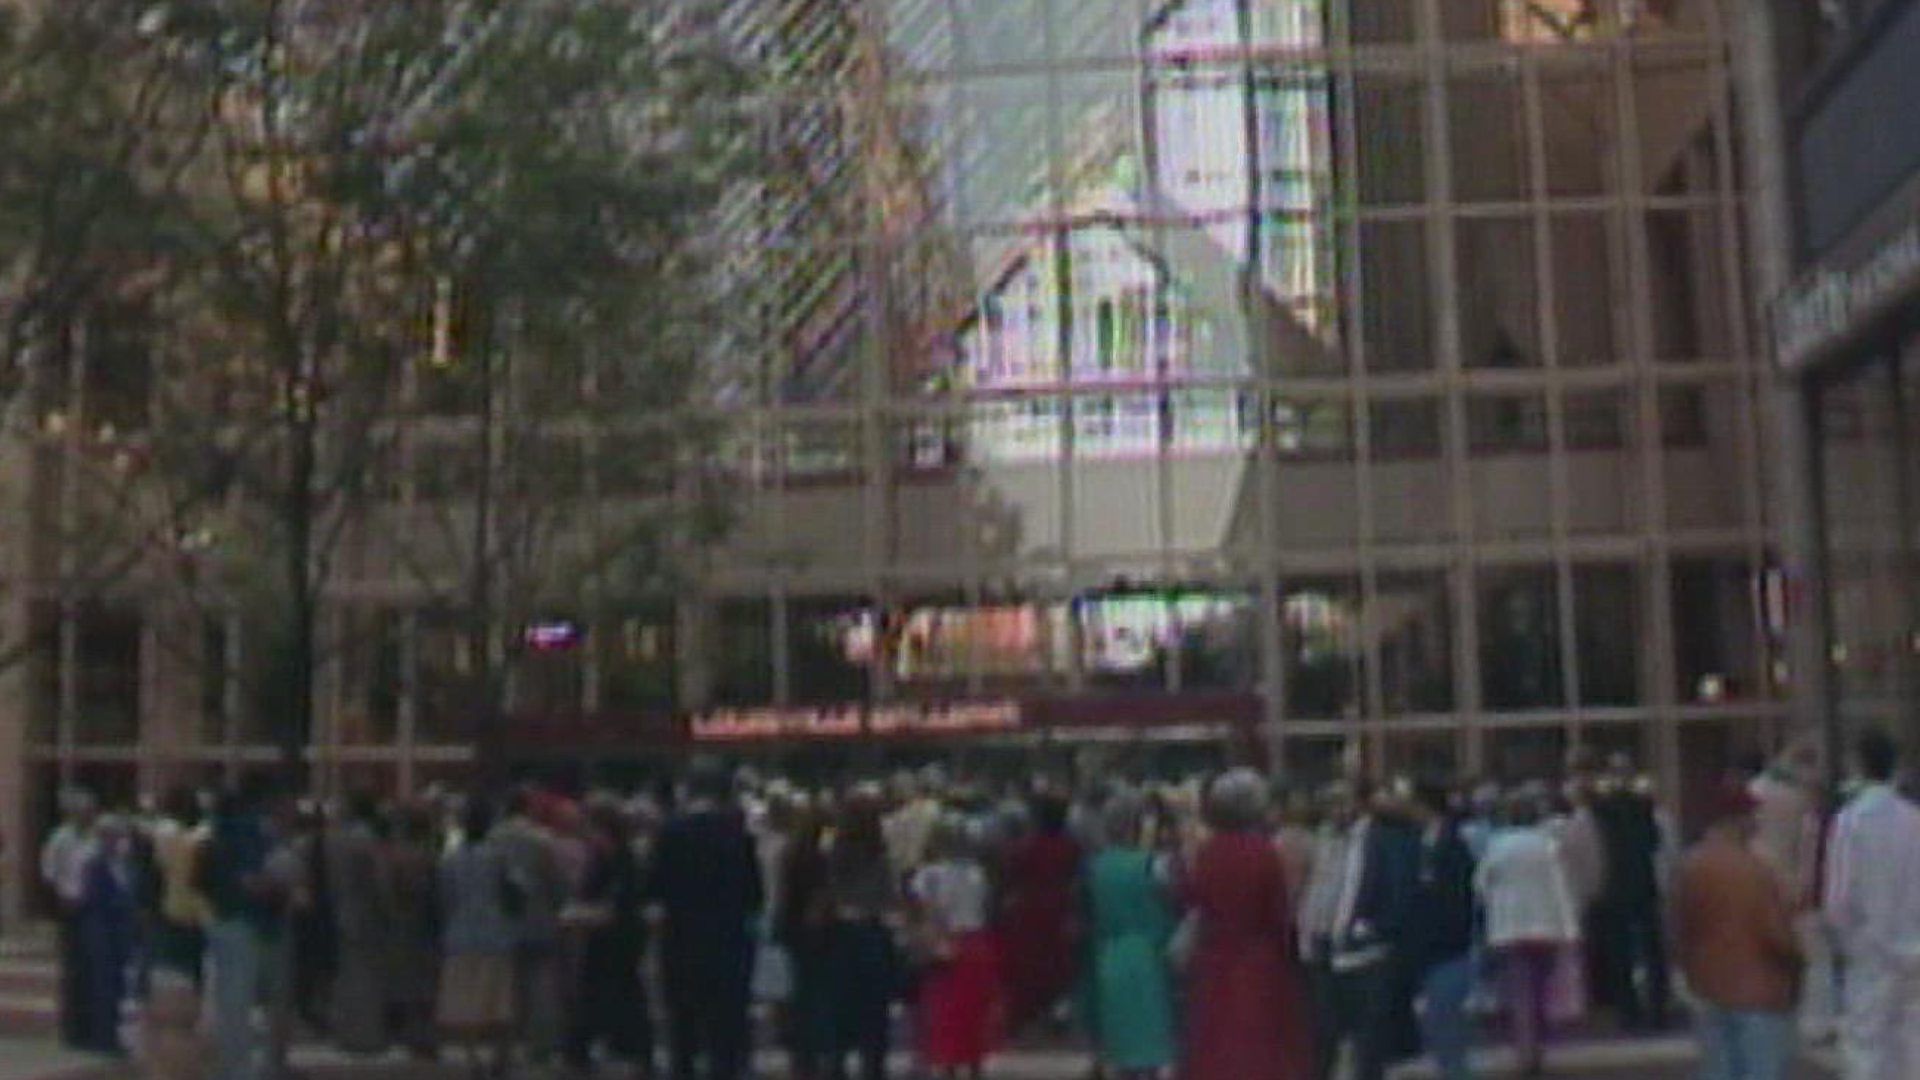 The Galleria was the prime destination for the community and tourists to gather for shopping, food and fun.